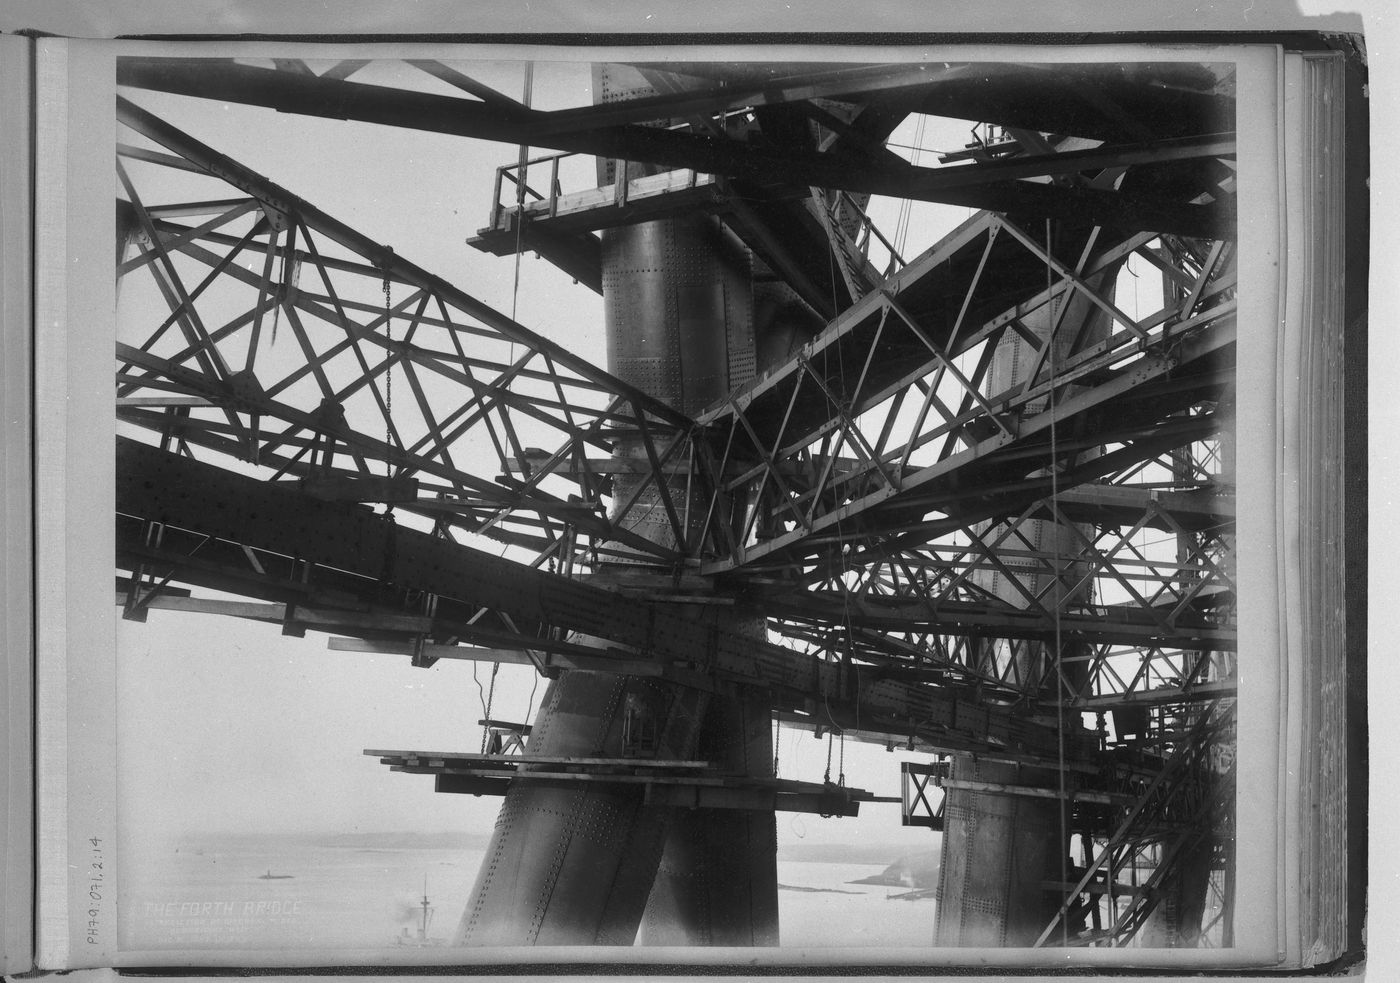 View of the Forth Bridge under construction, Firth of Forth, Scotland, United Kingdom